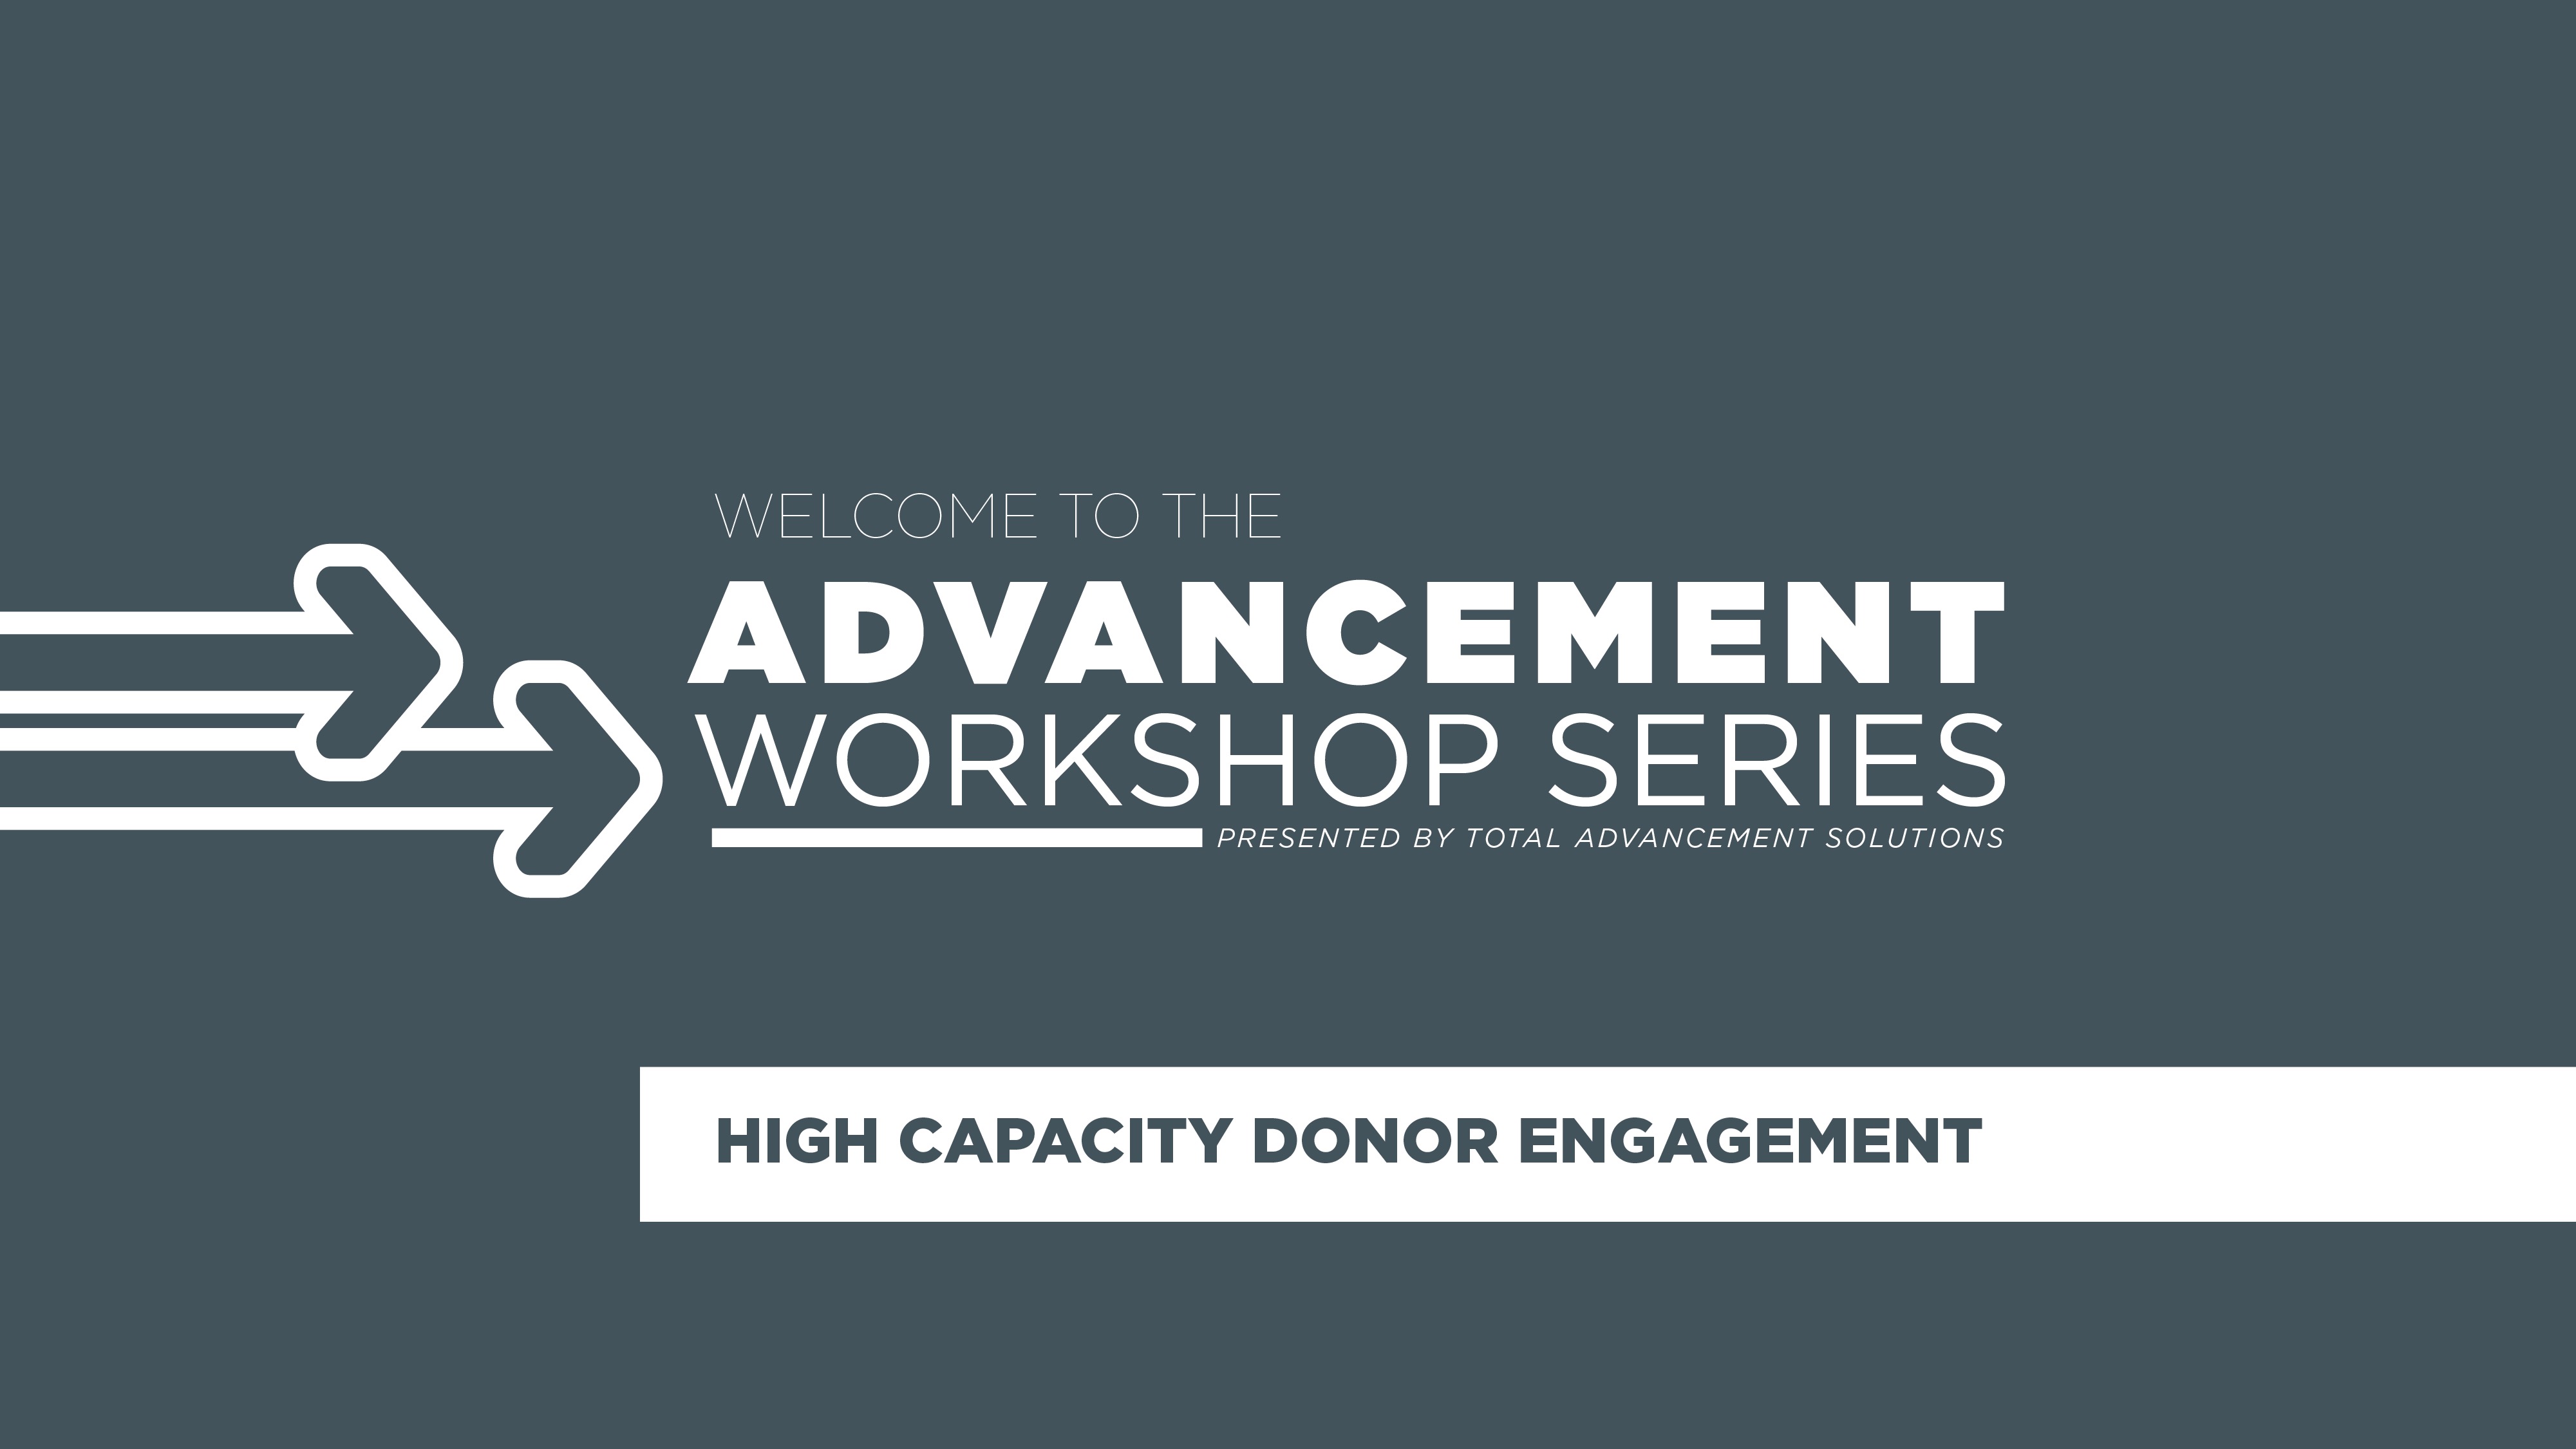 High Capacity Donor Engagement